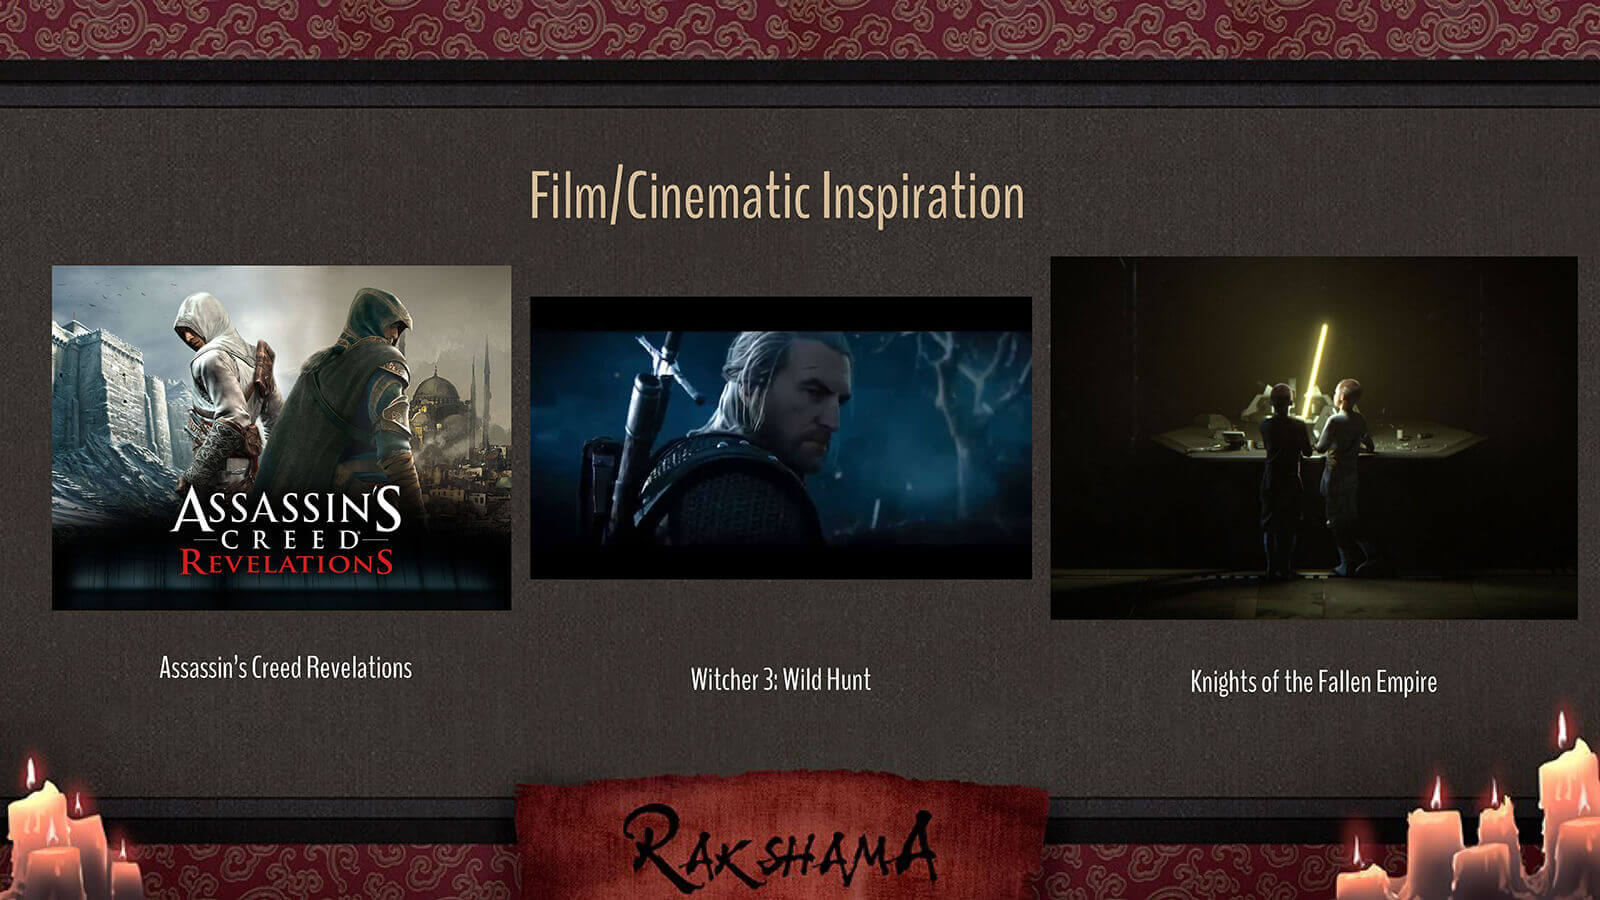 Film/Cinematic Inspiration slide for the film Rakshama, including images of Assassin's Creed and Witcher 3